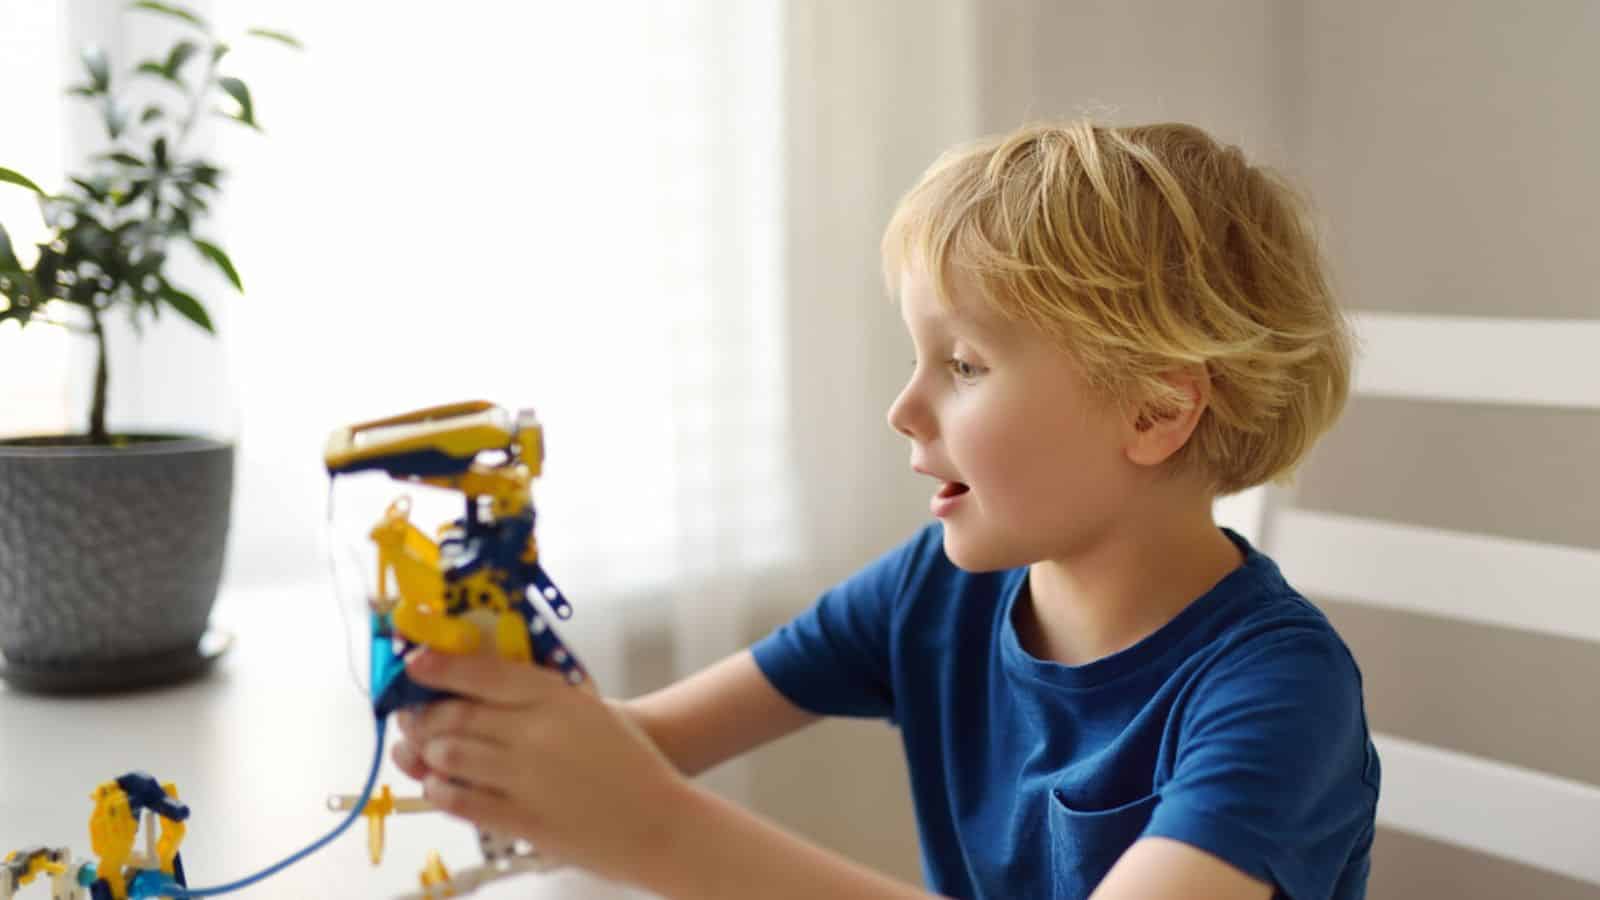 Preschooler boy playing with robot toy at home